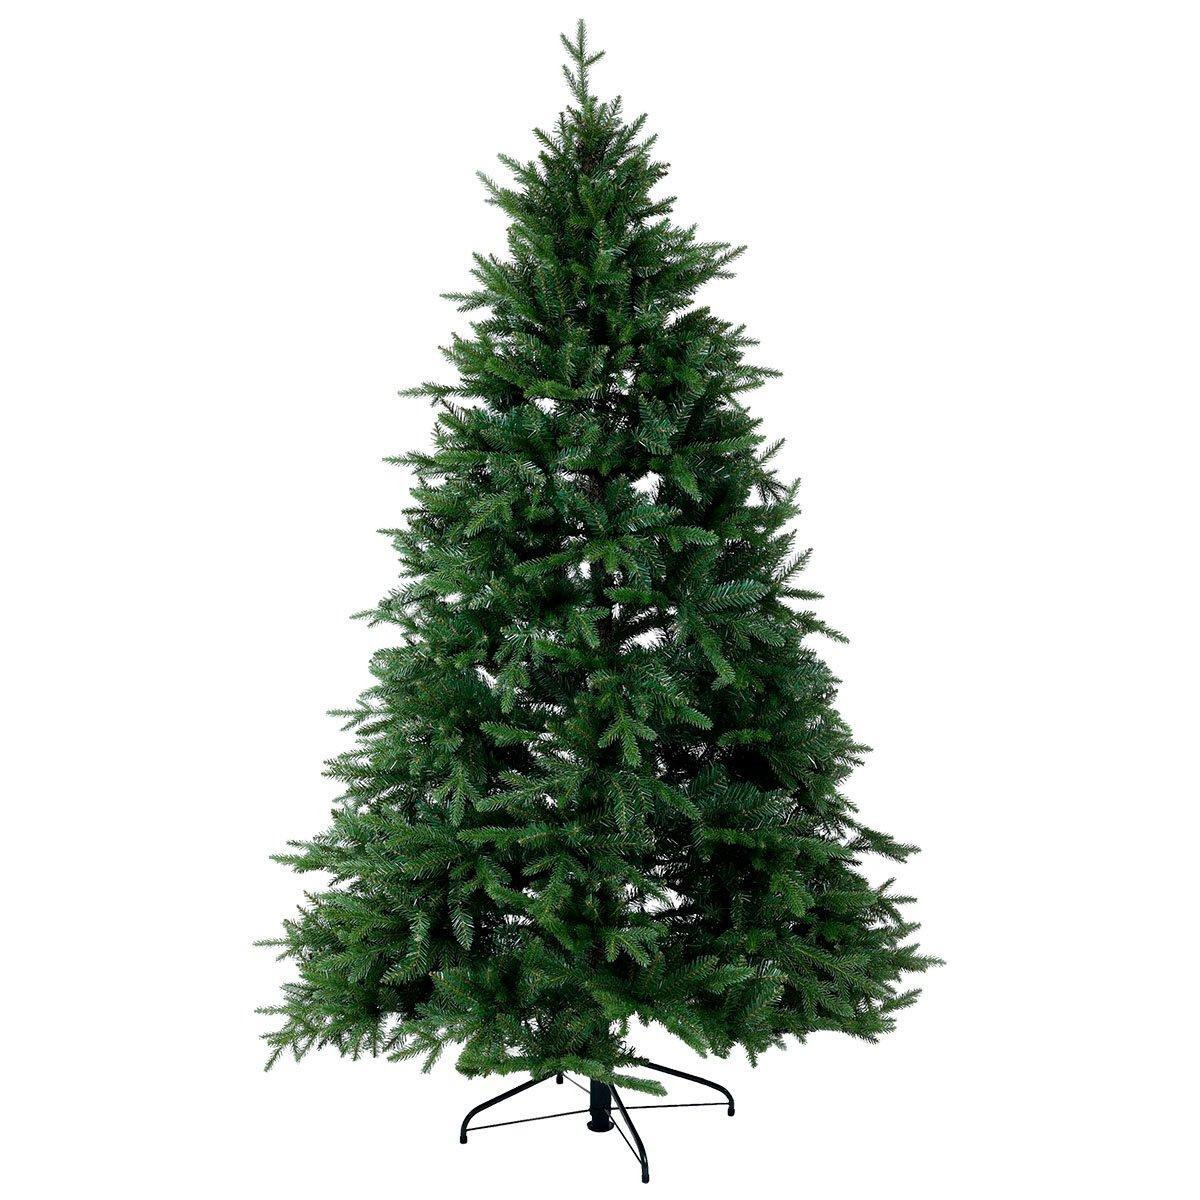 Luxury 8ft Faux Nordic Spruce Hinged Christmas Tree Artificial - image 1